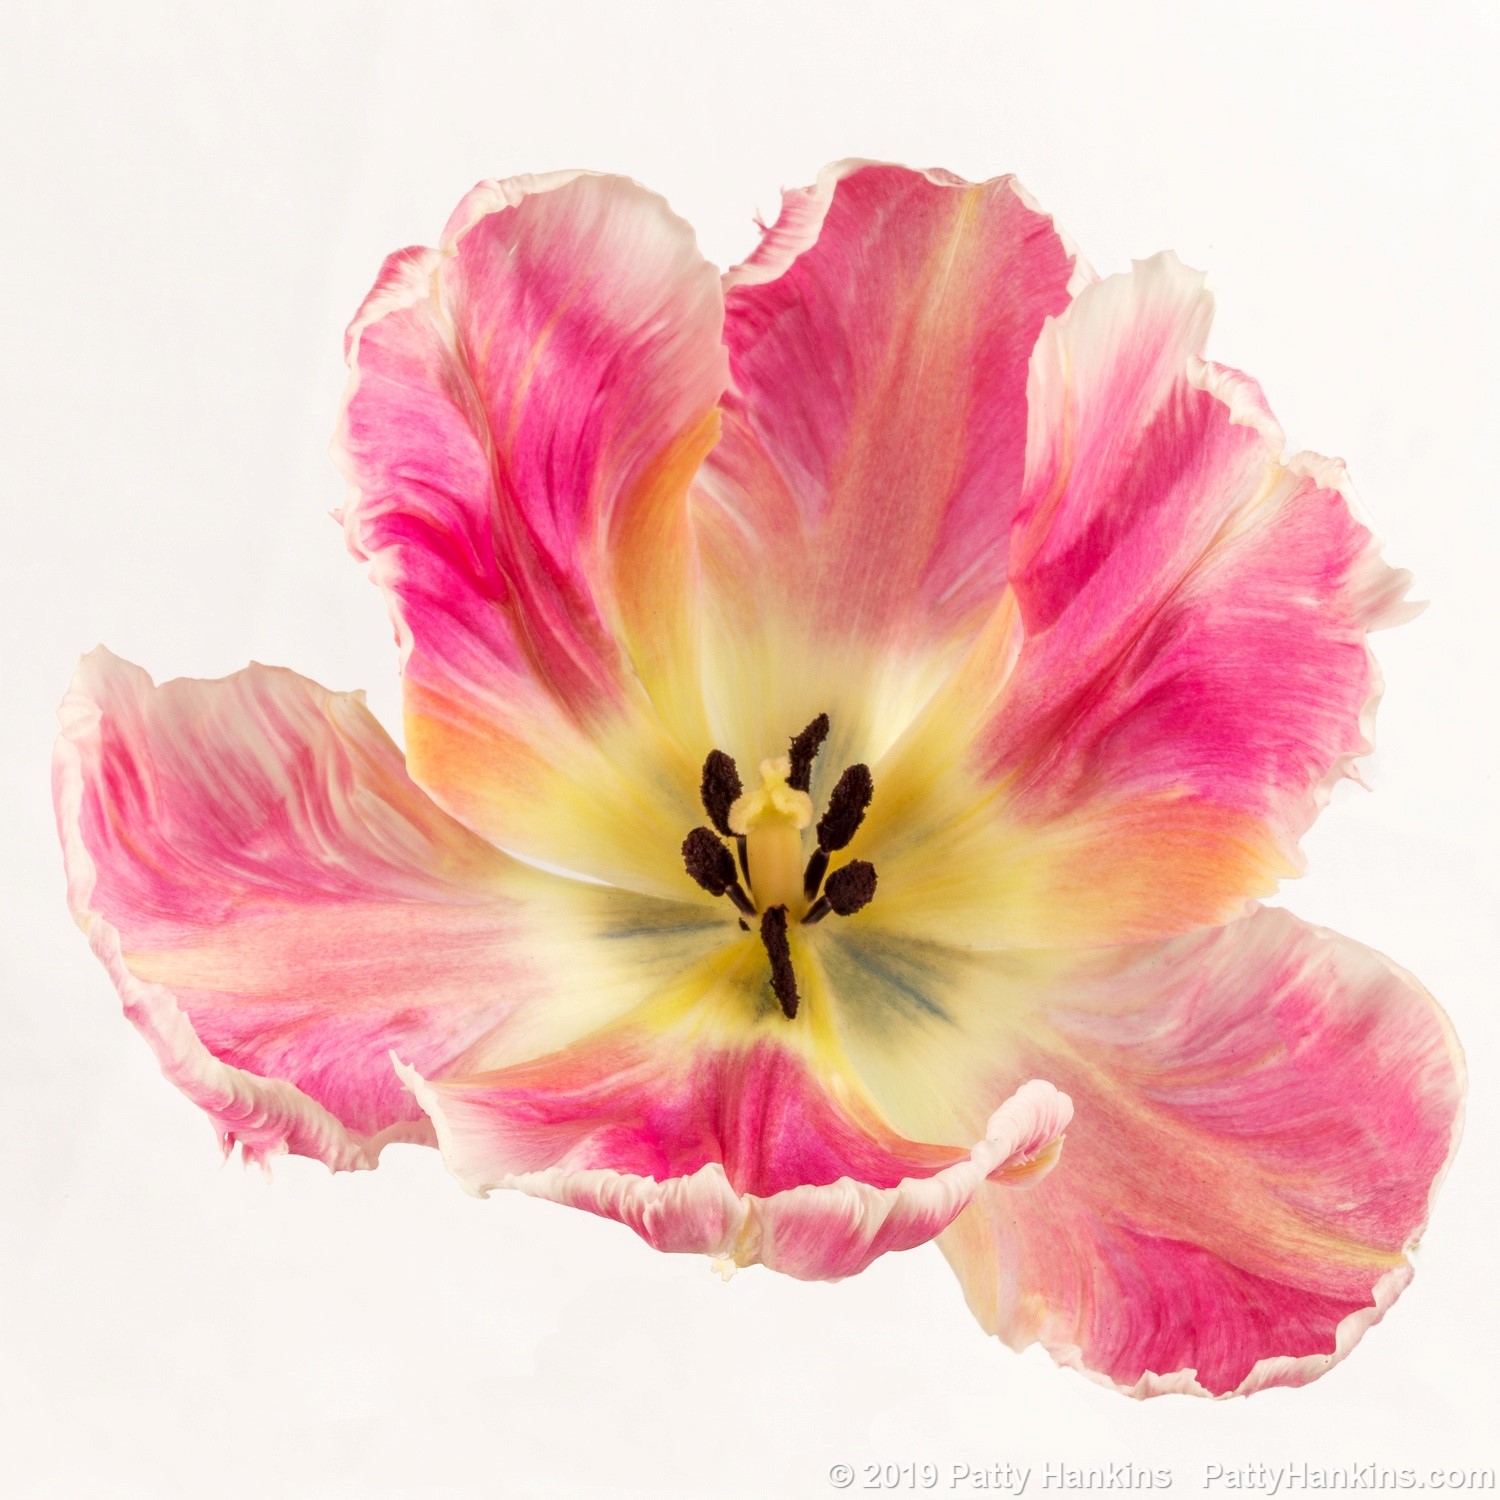 Pink & White Parrot Tulip – New Photo